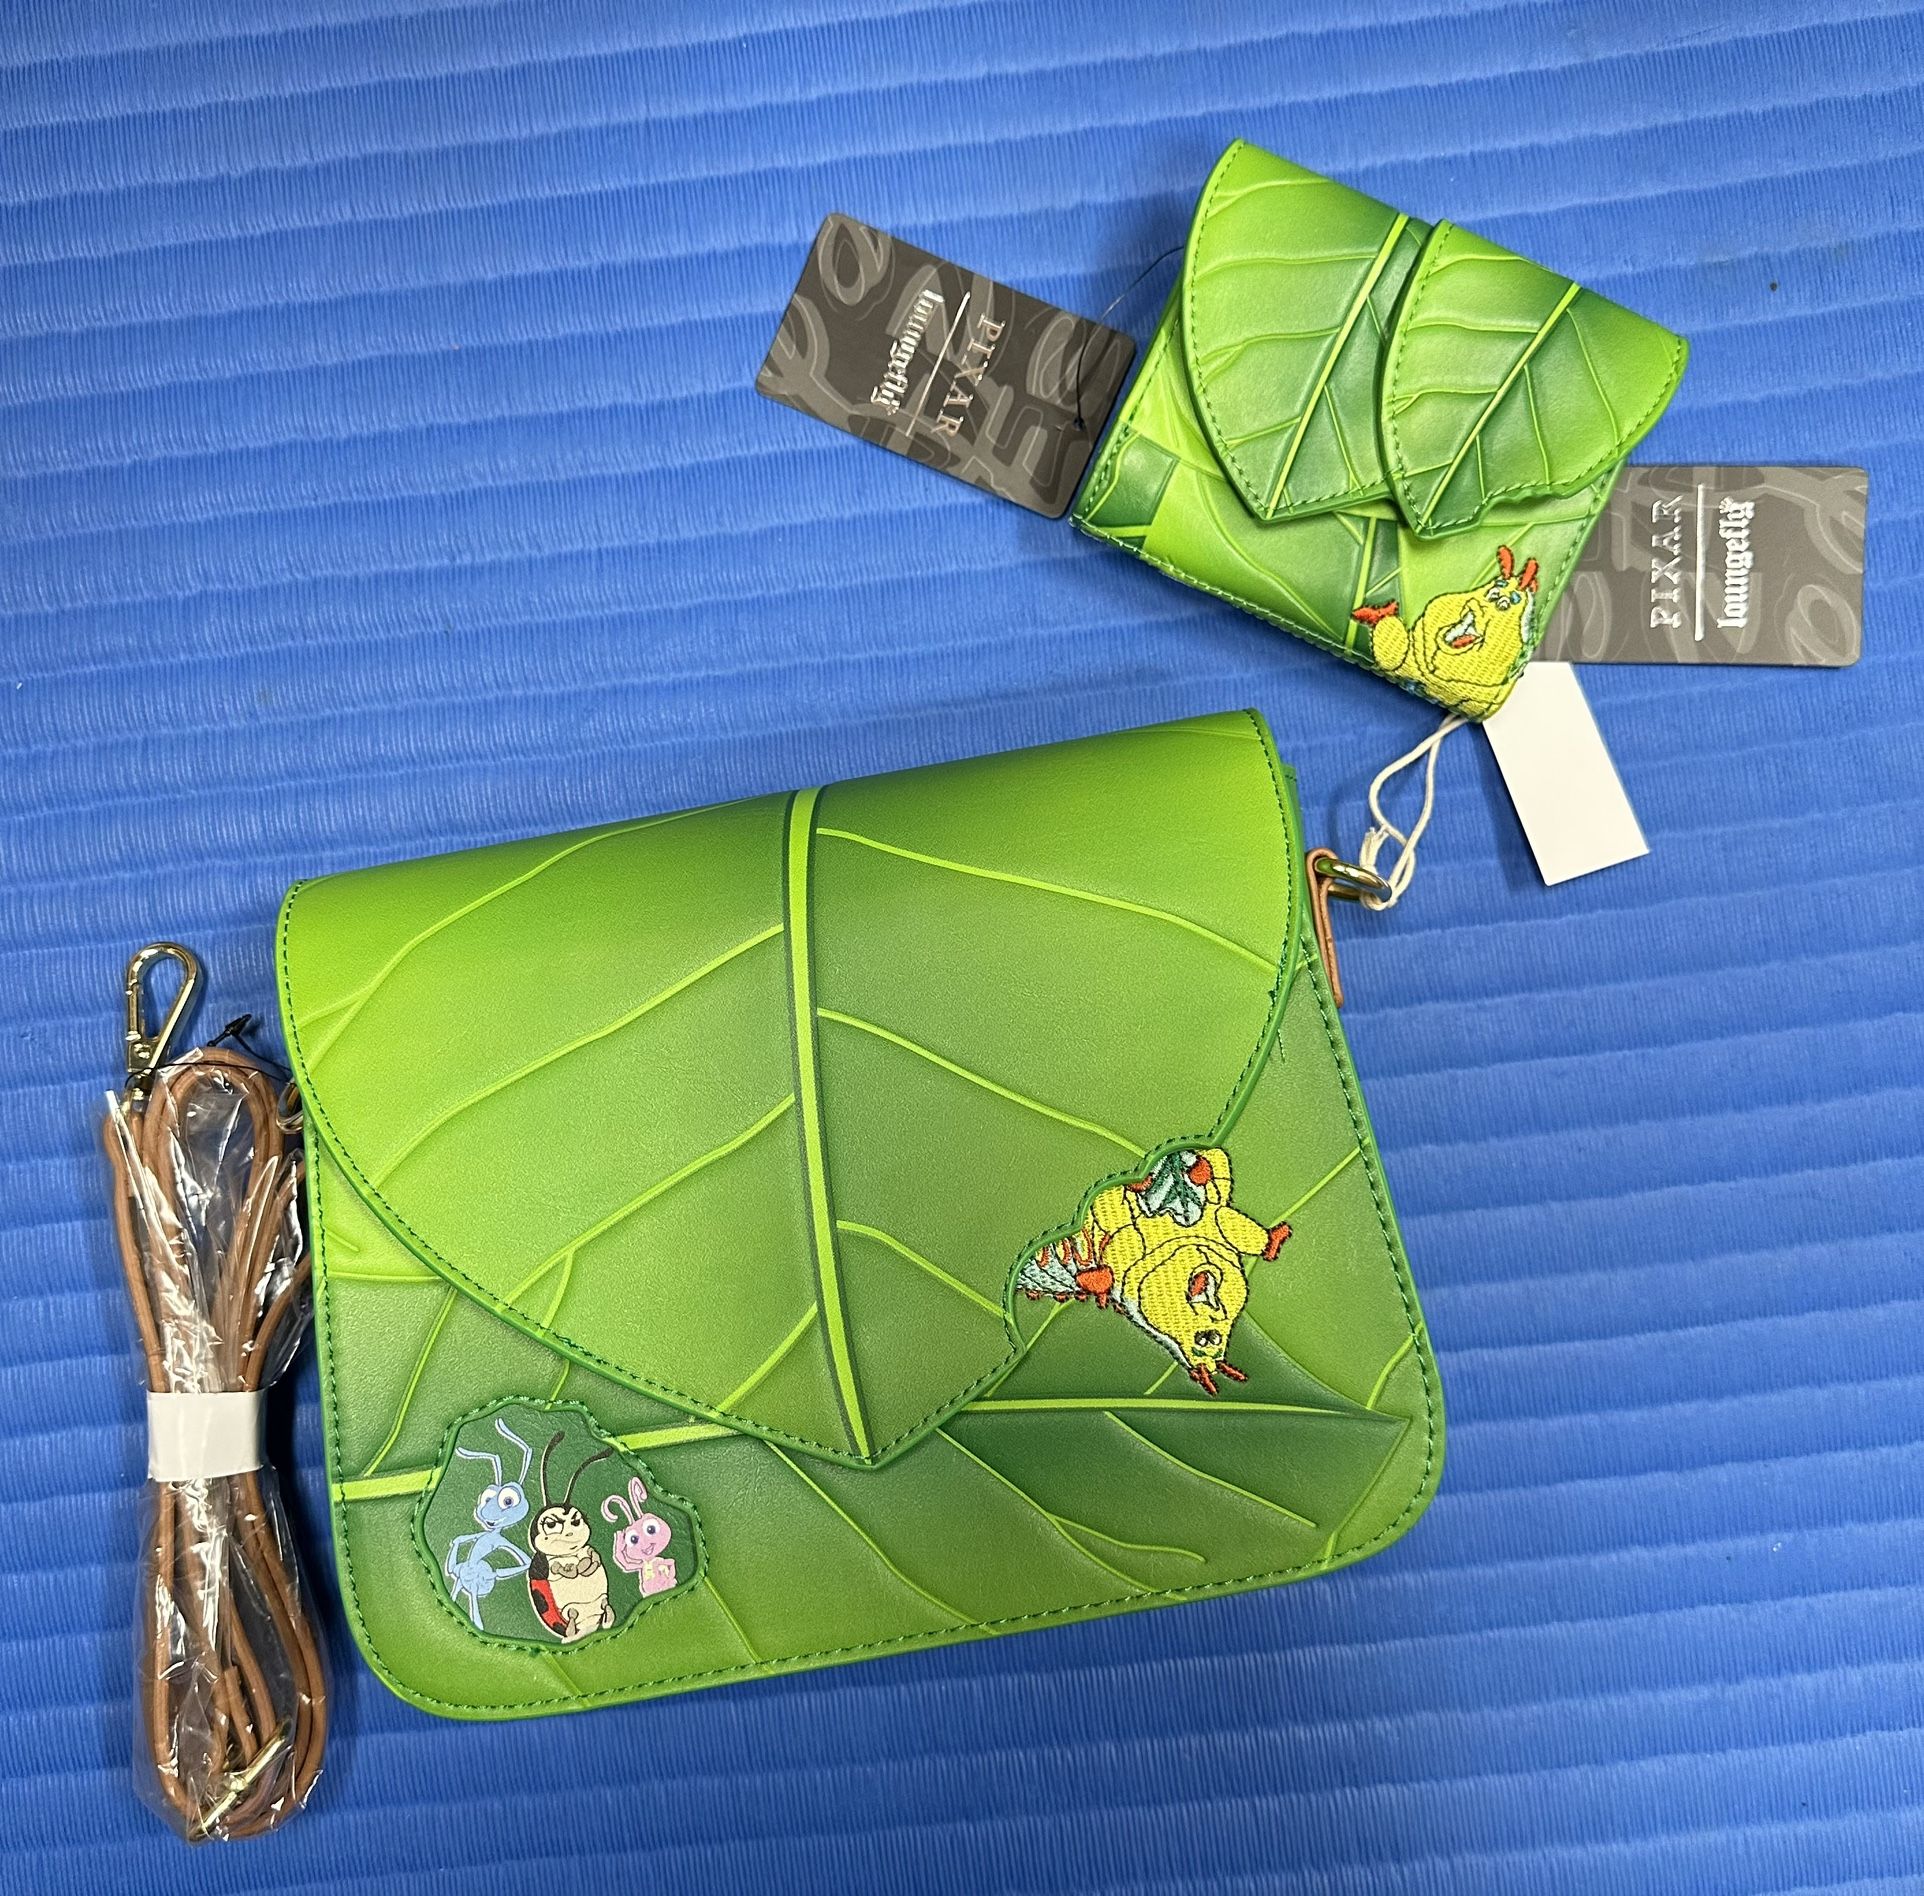 Loungefly Disney Pixar Bugs Life Crossbody Purse and Matching Wallet - Both  NWTs Loungefly Disney Pixar A Bug's Life Leaf Crossbody Purse: Approx. 9  for Sale in Glendale, AZ - OfferUp